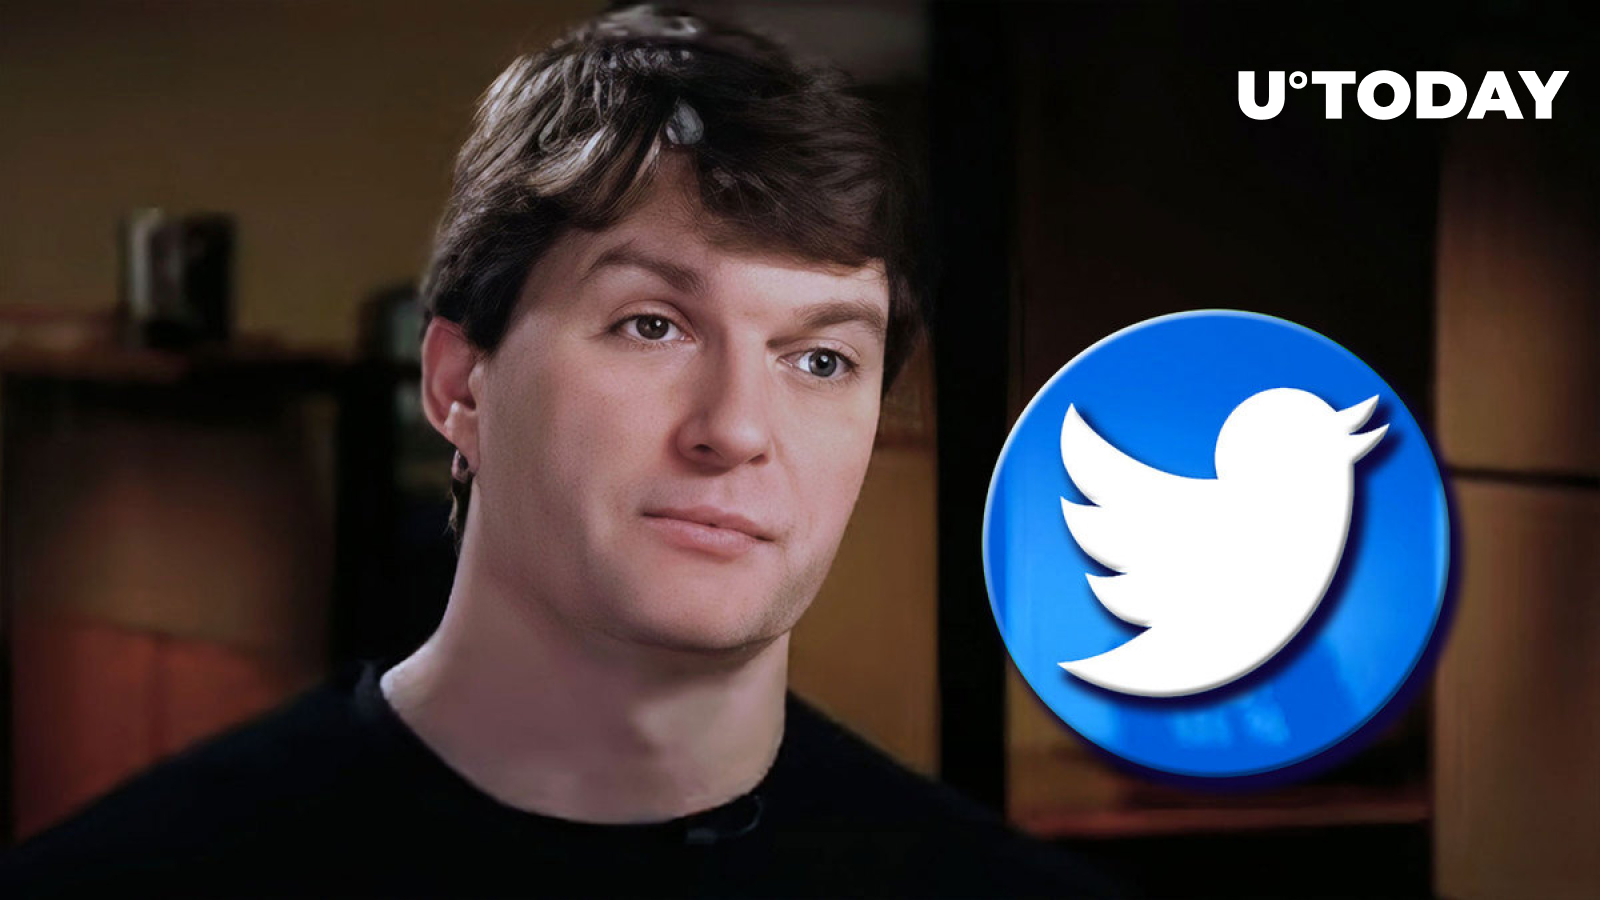 ‘Big Short’ Hero Michael Burry Deletes His Twitter Account After Posting Cryptic Market Prediction